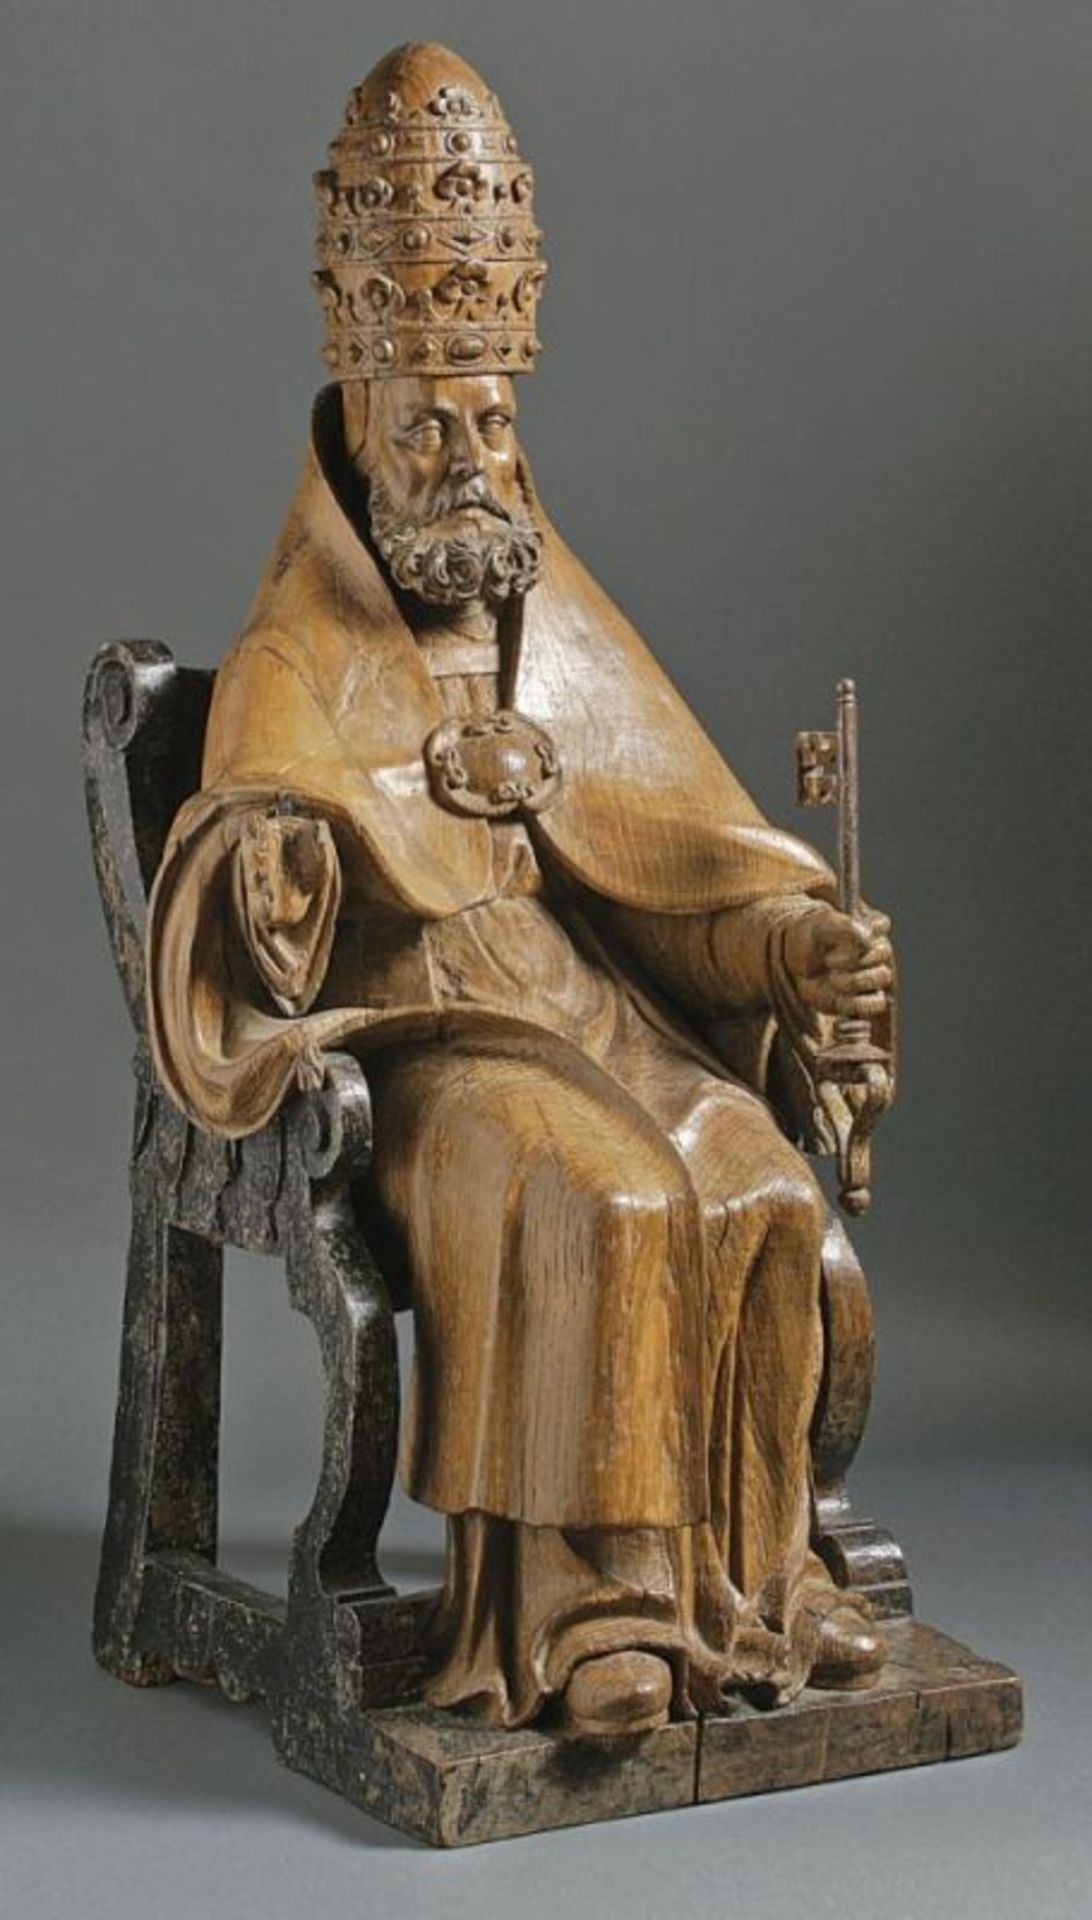 Saint Peter with tiaraFlanders, late 16th centuryA saint sitting on an open carved chair in an